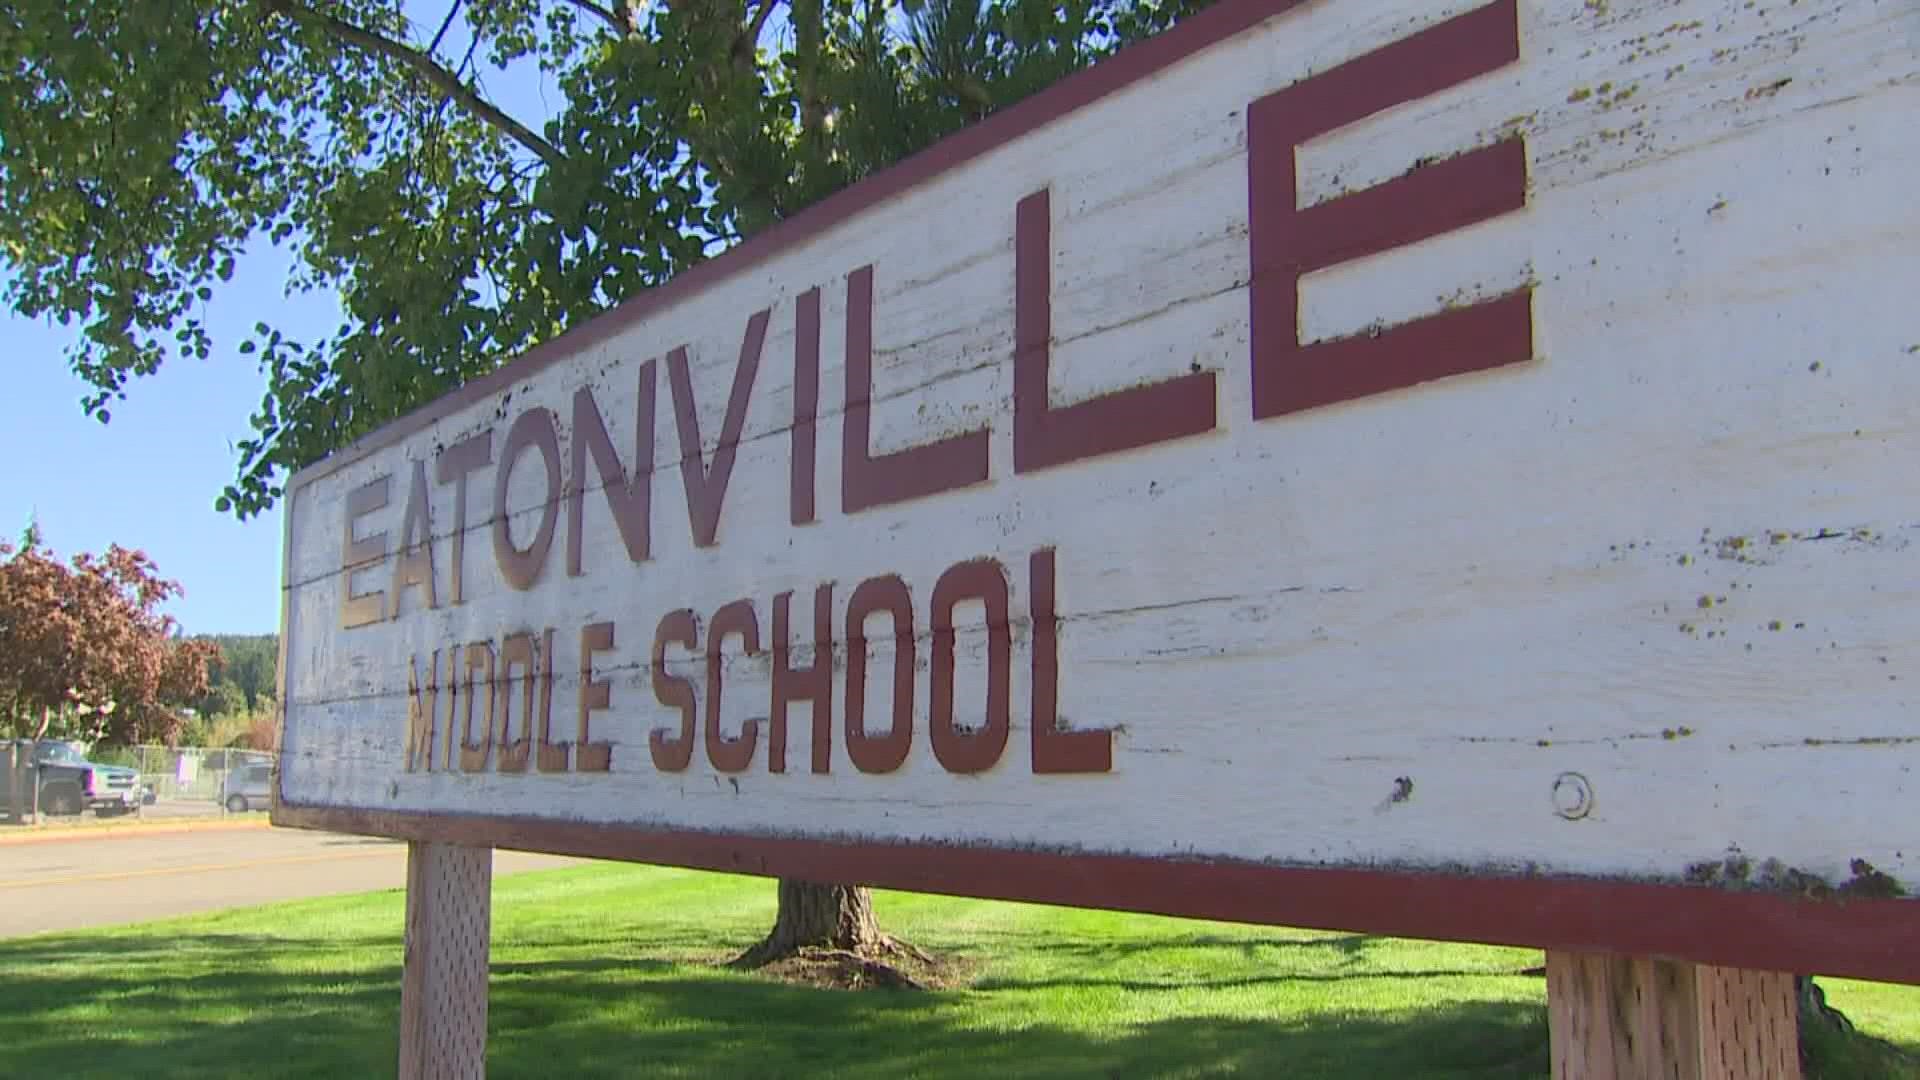 Eatonville Middle School returned to remote learning after an outbreak of COVID-19. They are set for a tentative return to class on October 11th.